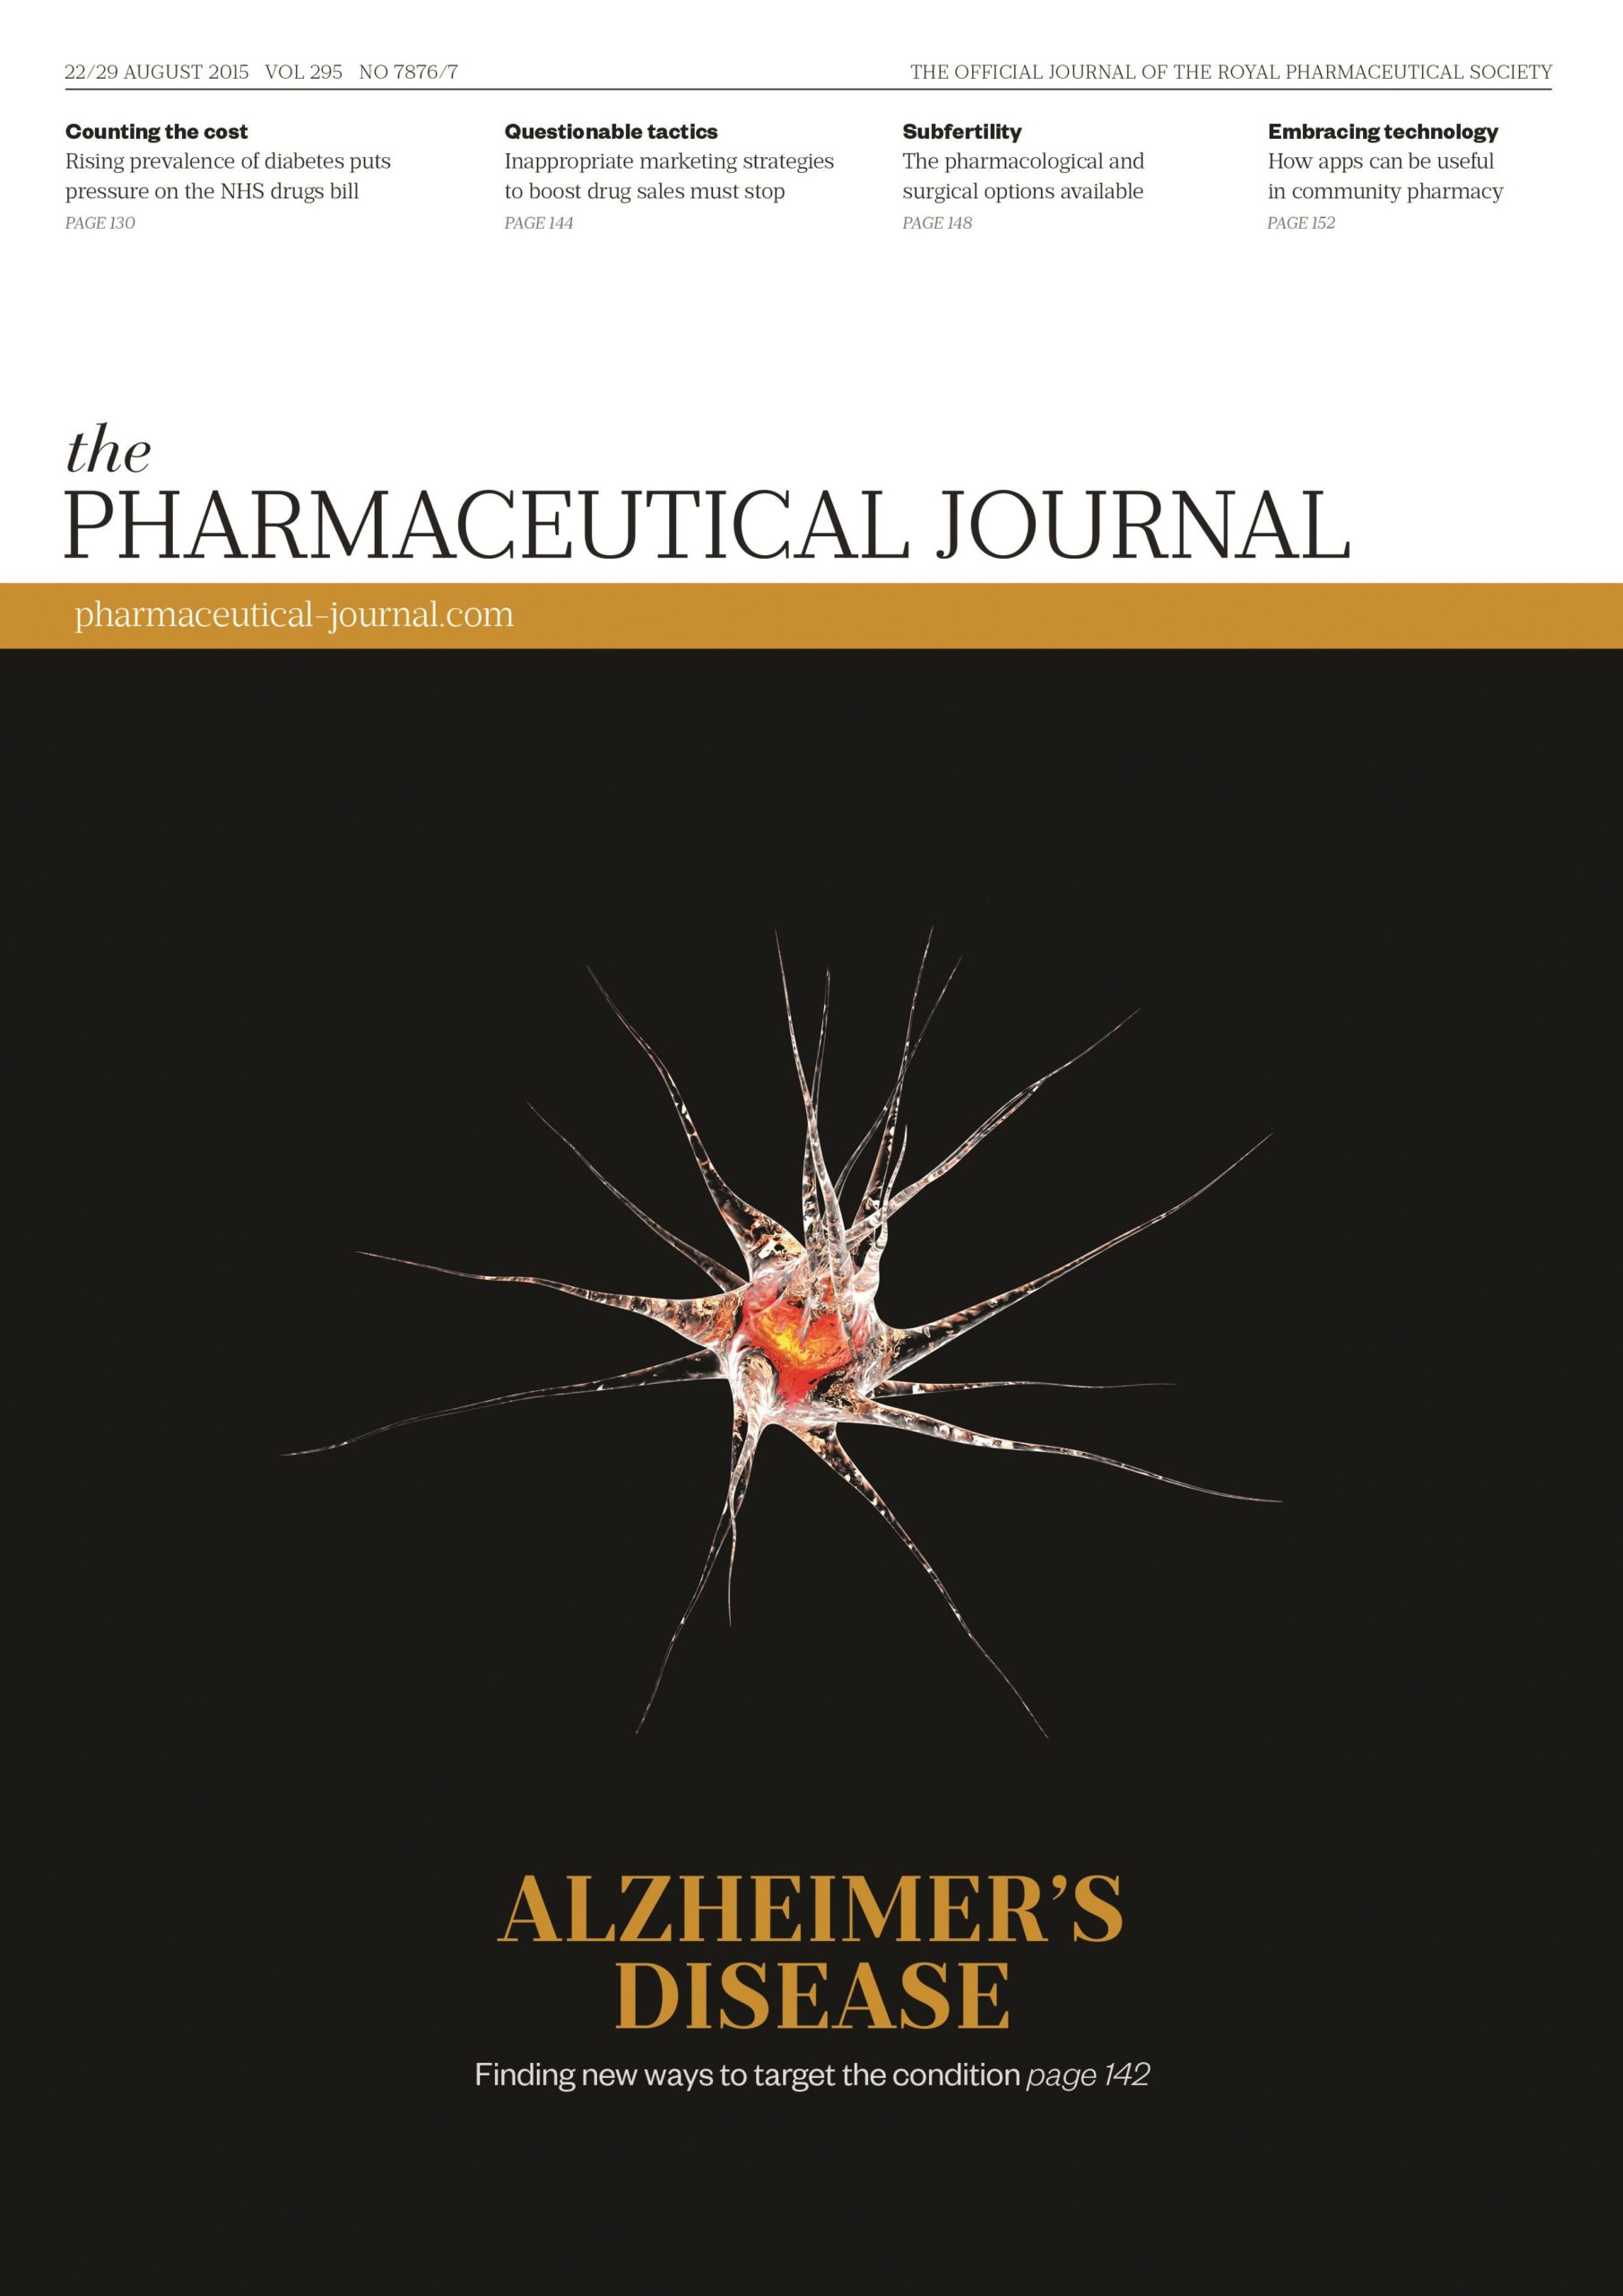 Publication issue cover for PJ, 22/29 August 2015, Vol 295, No 7876/7